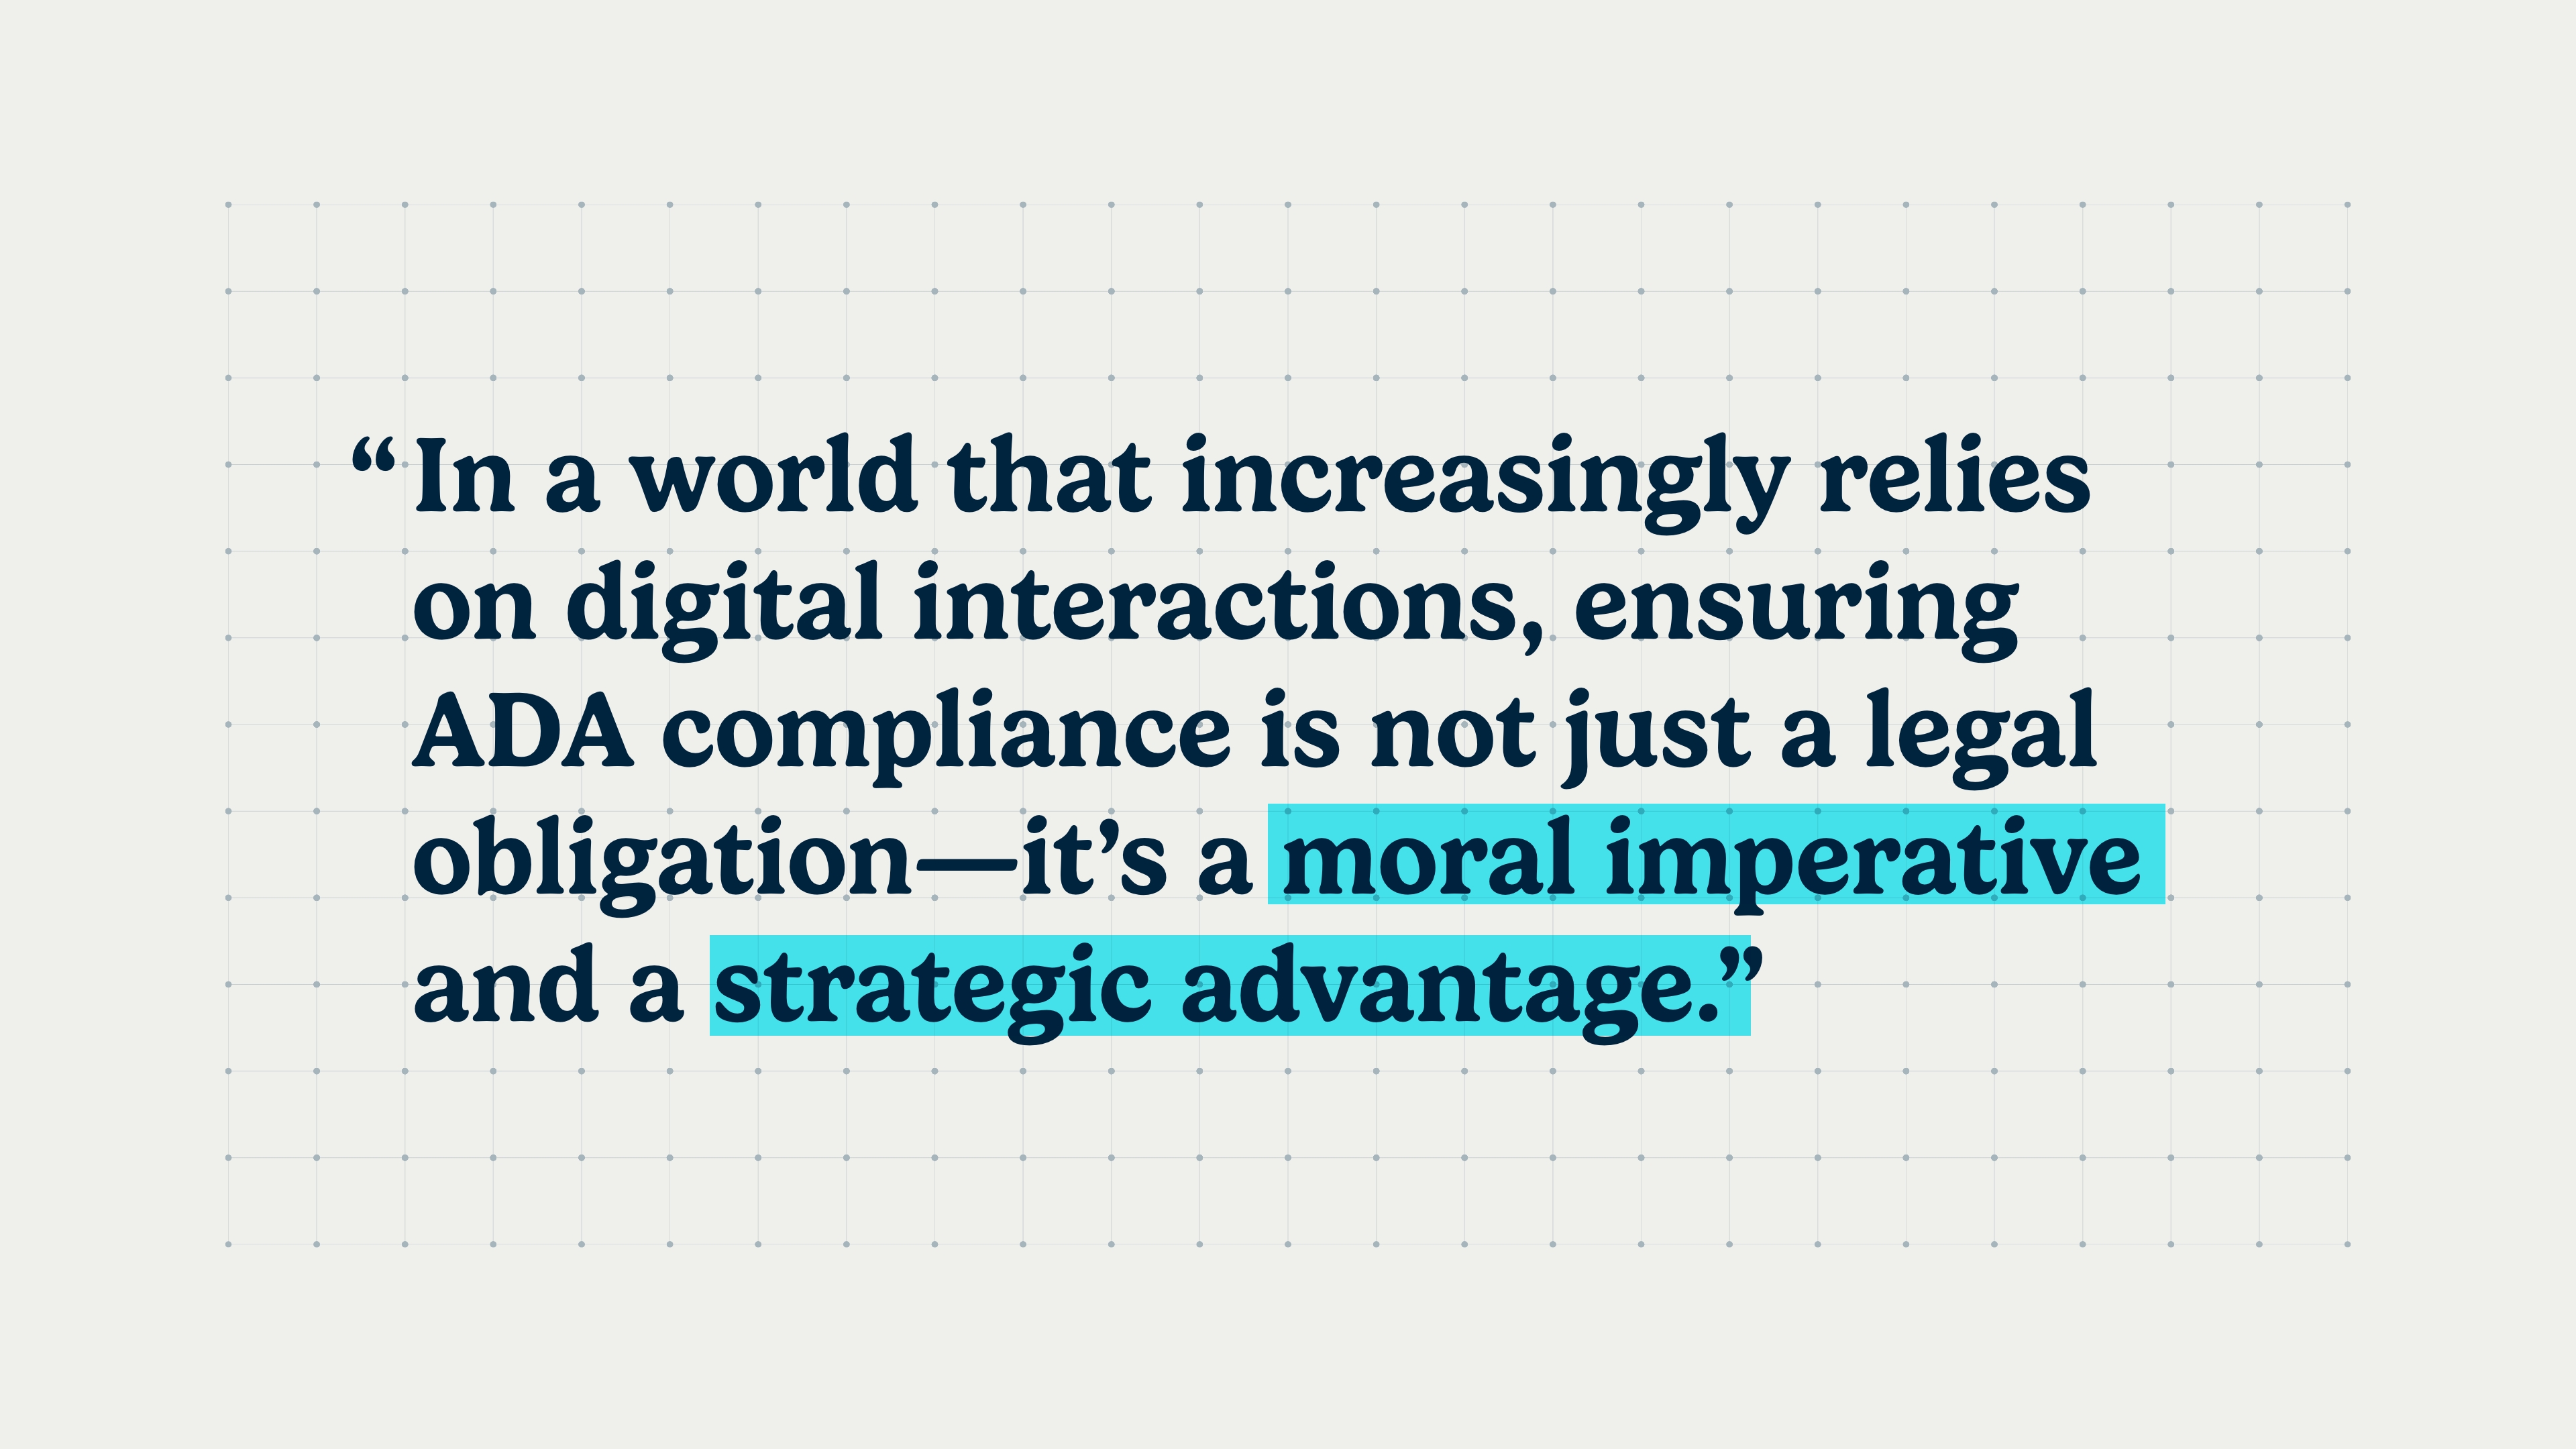 Text: "In a world that increasingly relies on digital interactions, ensuring ADA compliance is not just a legal obligation - it's a moral imperative and a strategic advantage